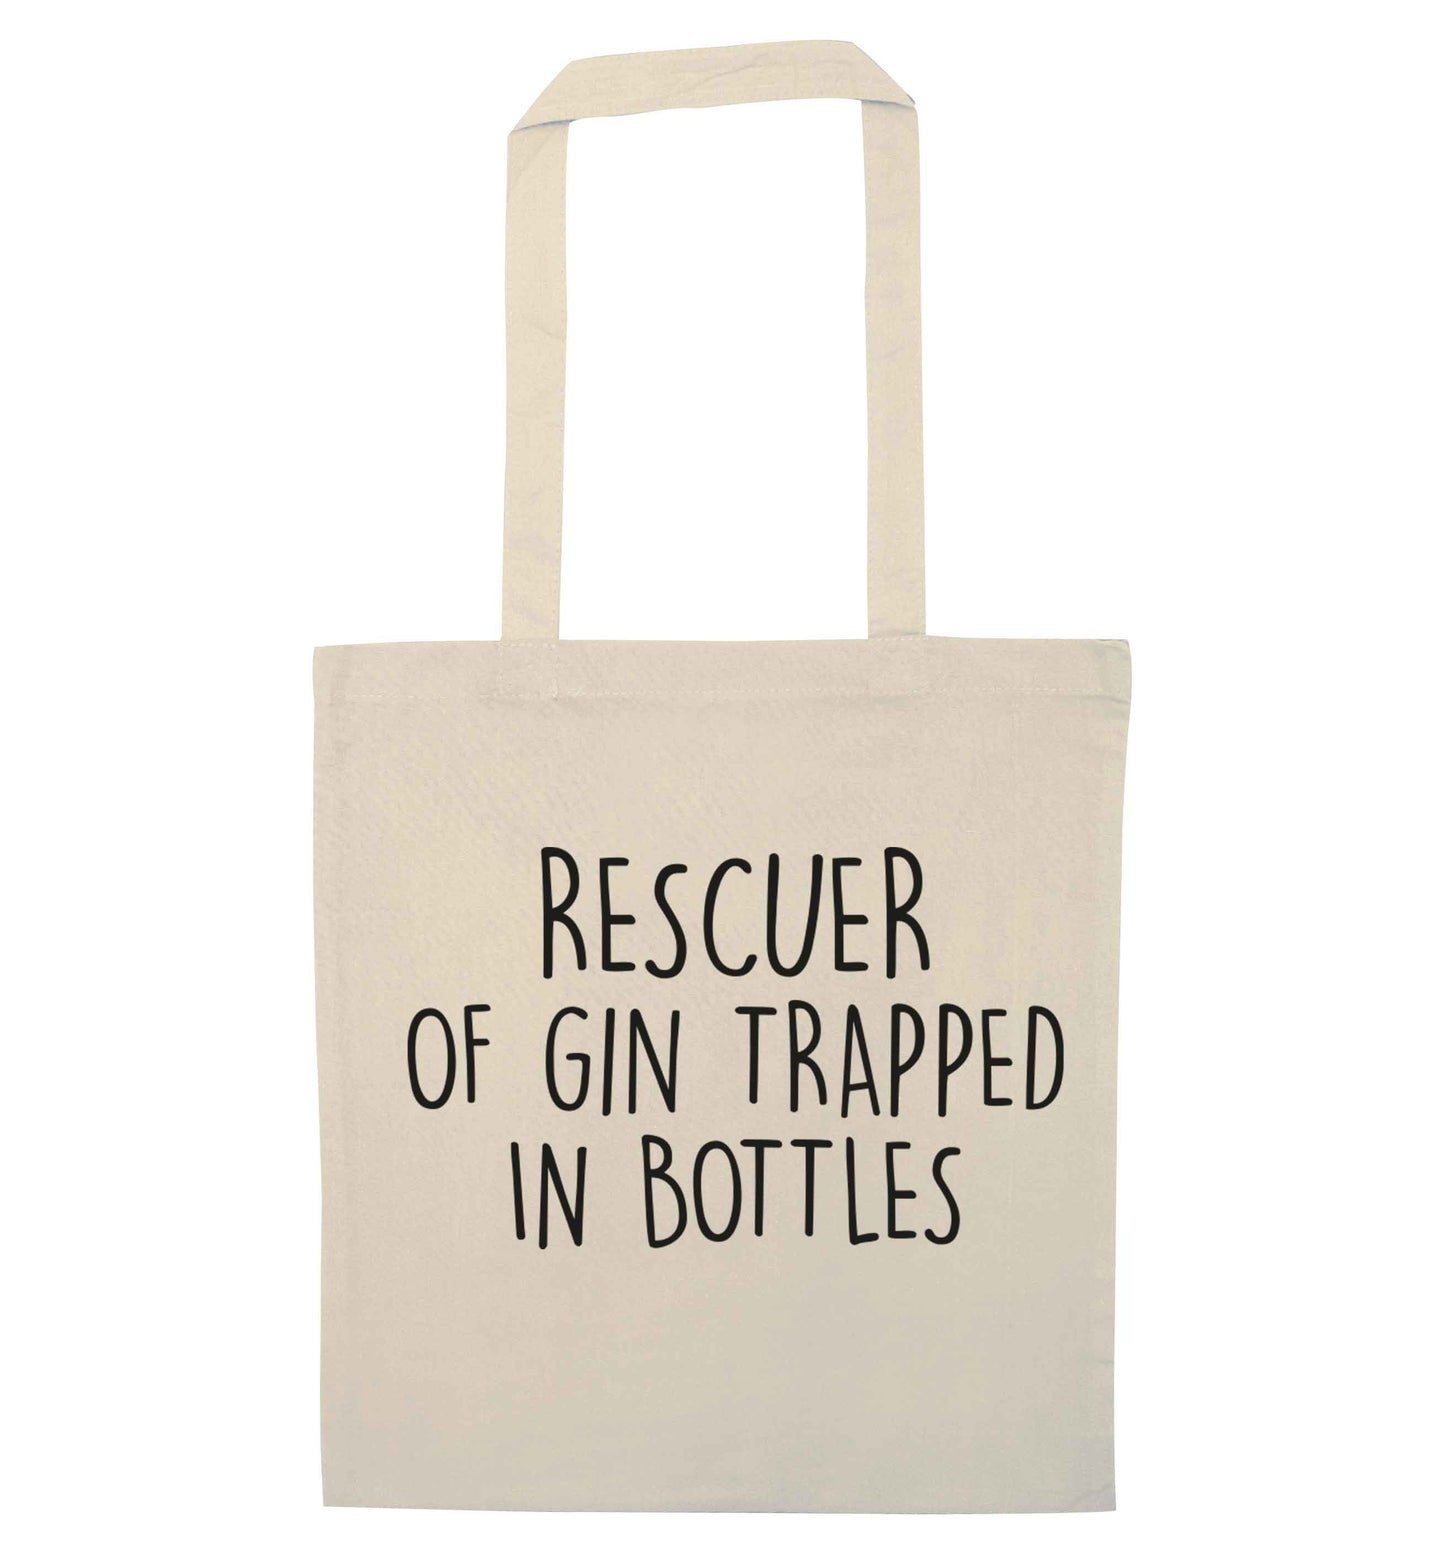 Rescuer of gin trapped in bottles natural tote bag